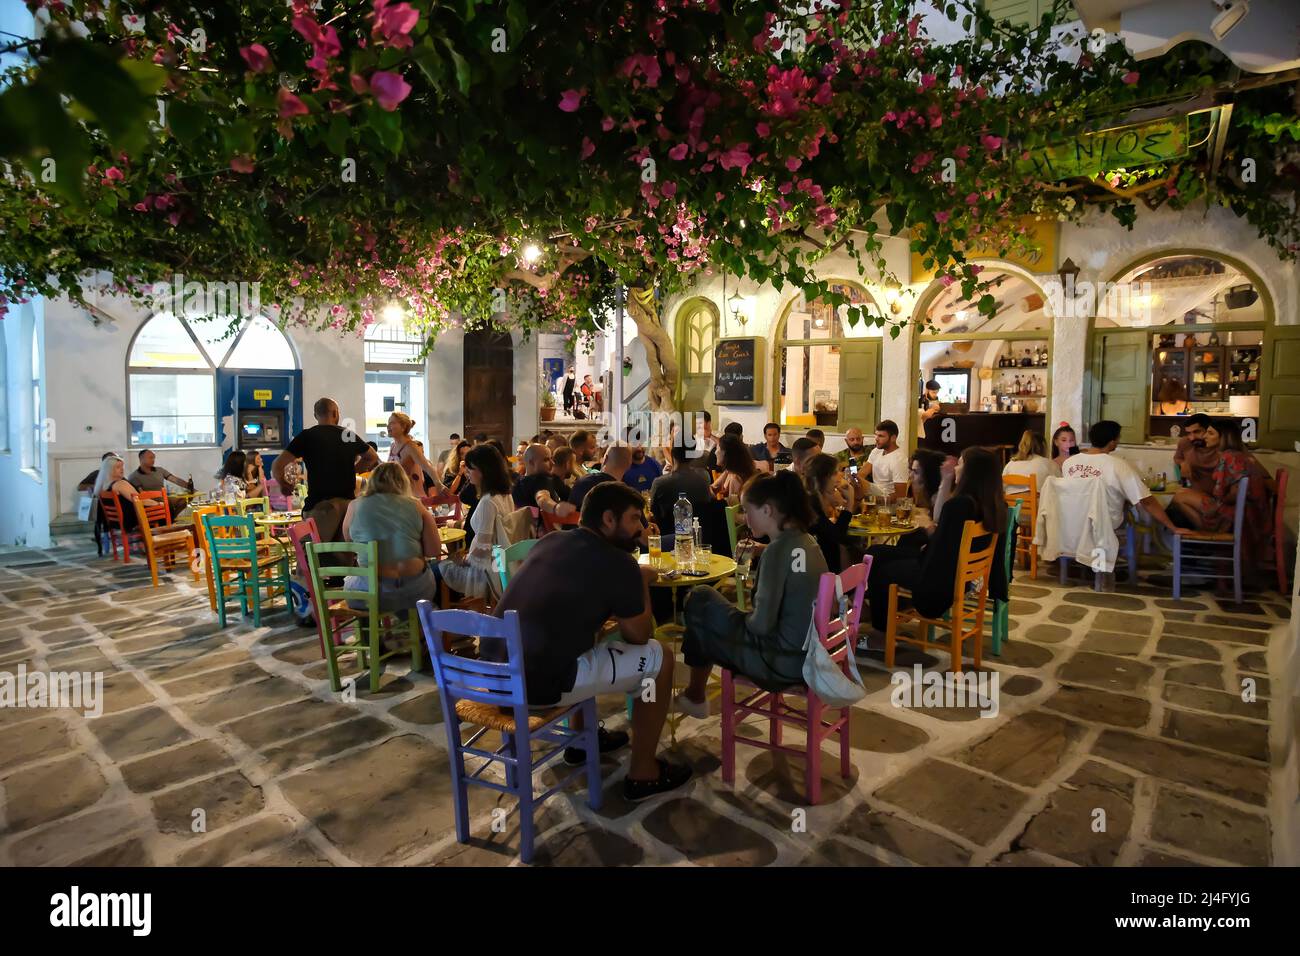 Ios, Greece - June 13, 2021 : Tourists enjoying drinks and listening to live greek music at a picturesque and colorful outdoor bar in iOS Stock Photo